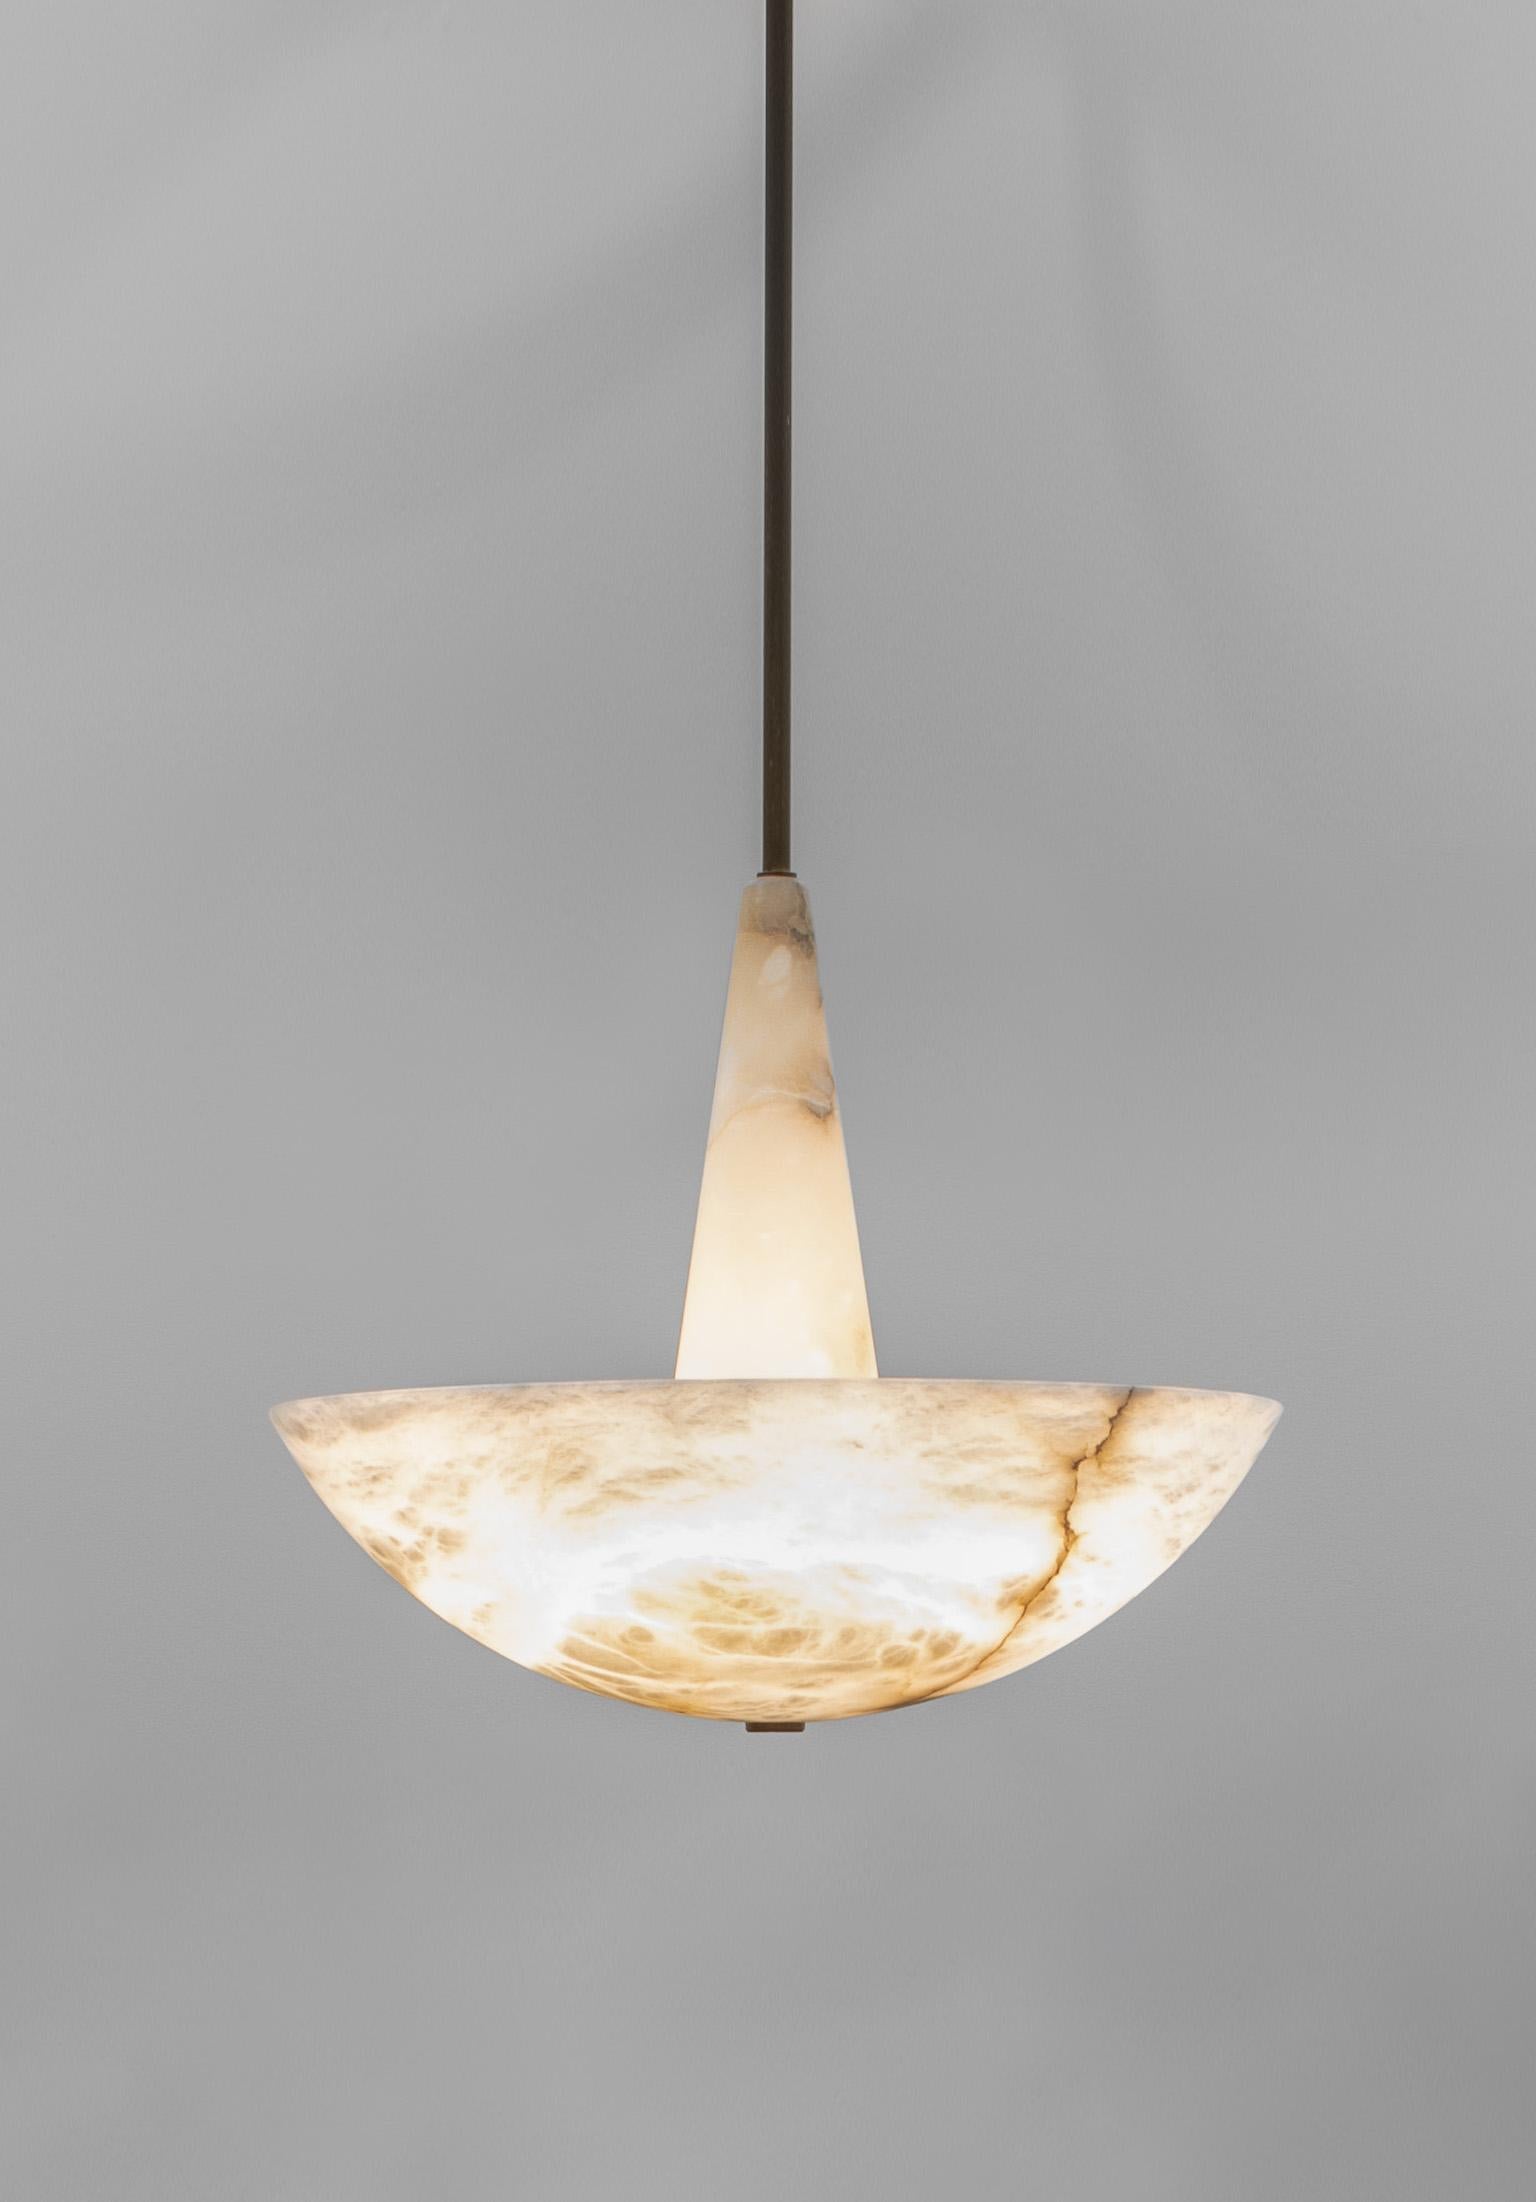 Lighting fixture in alabaster by Garnier & Linker is presented by Anne Jacquemin Sablon

Lighting fixture in alabaster and patinated brass. Alabaster options: white or veined. Brass options: natural brushed, light brushed patina, black patina or